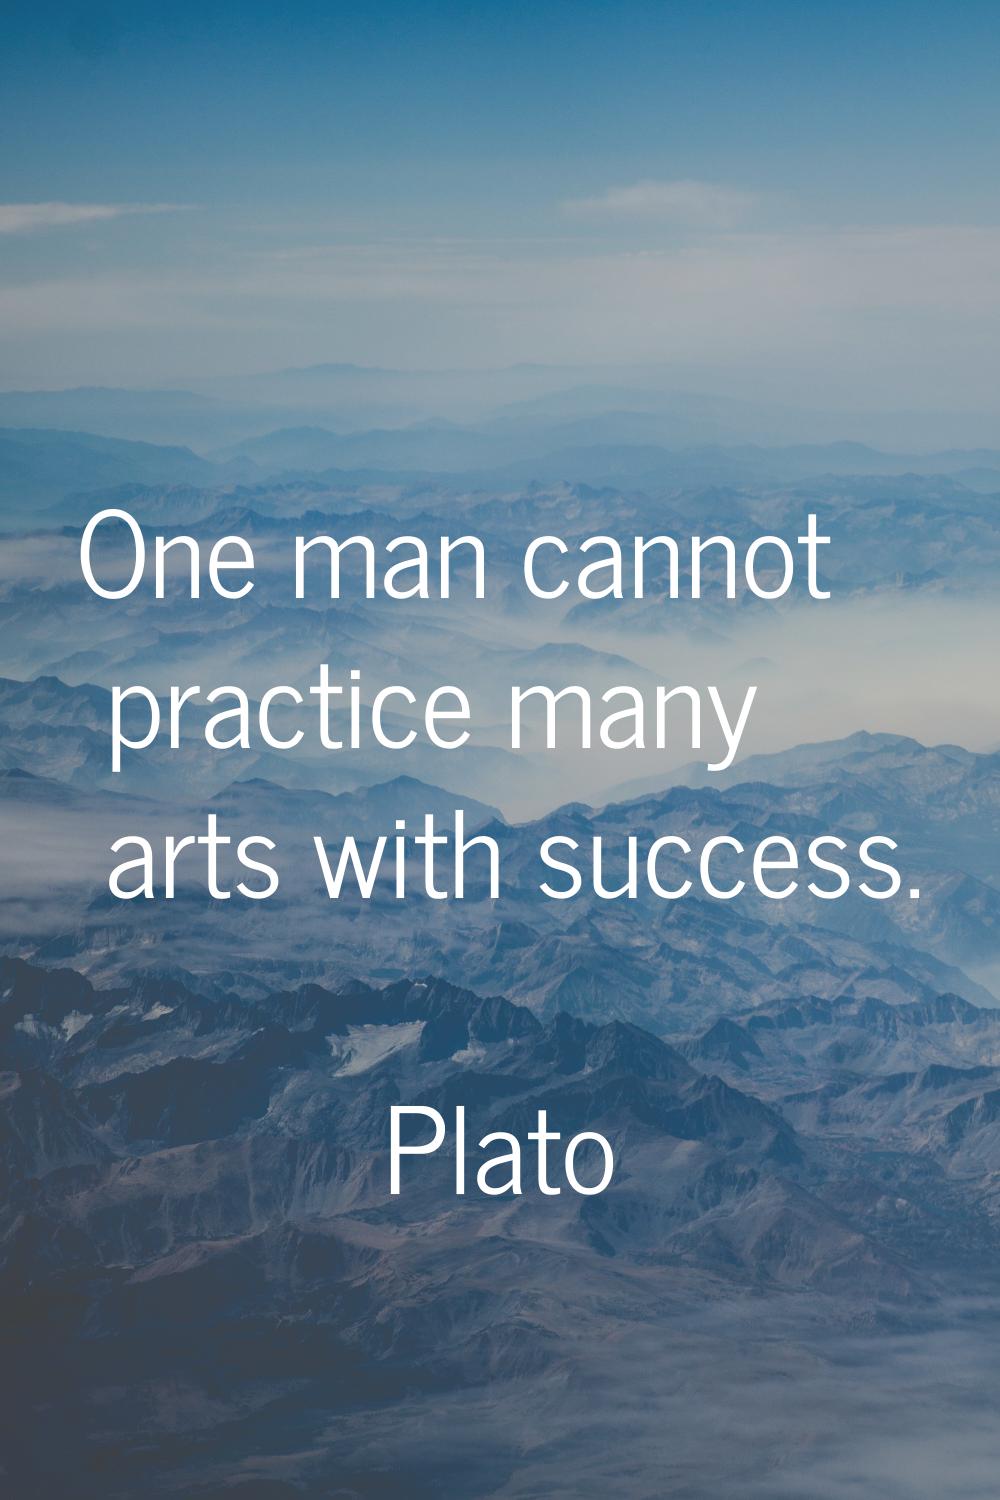 One man cannot practice many arts with success.